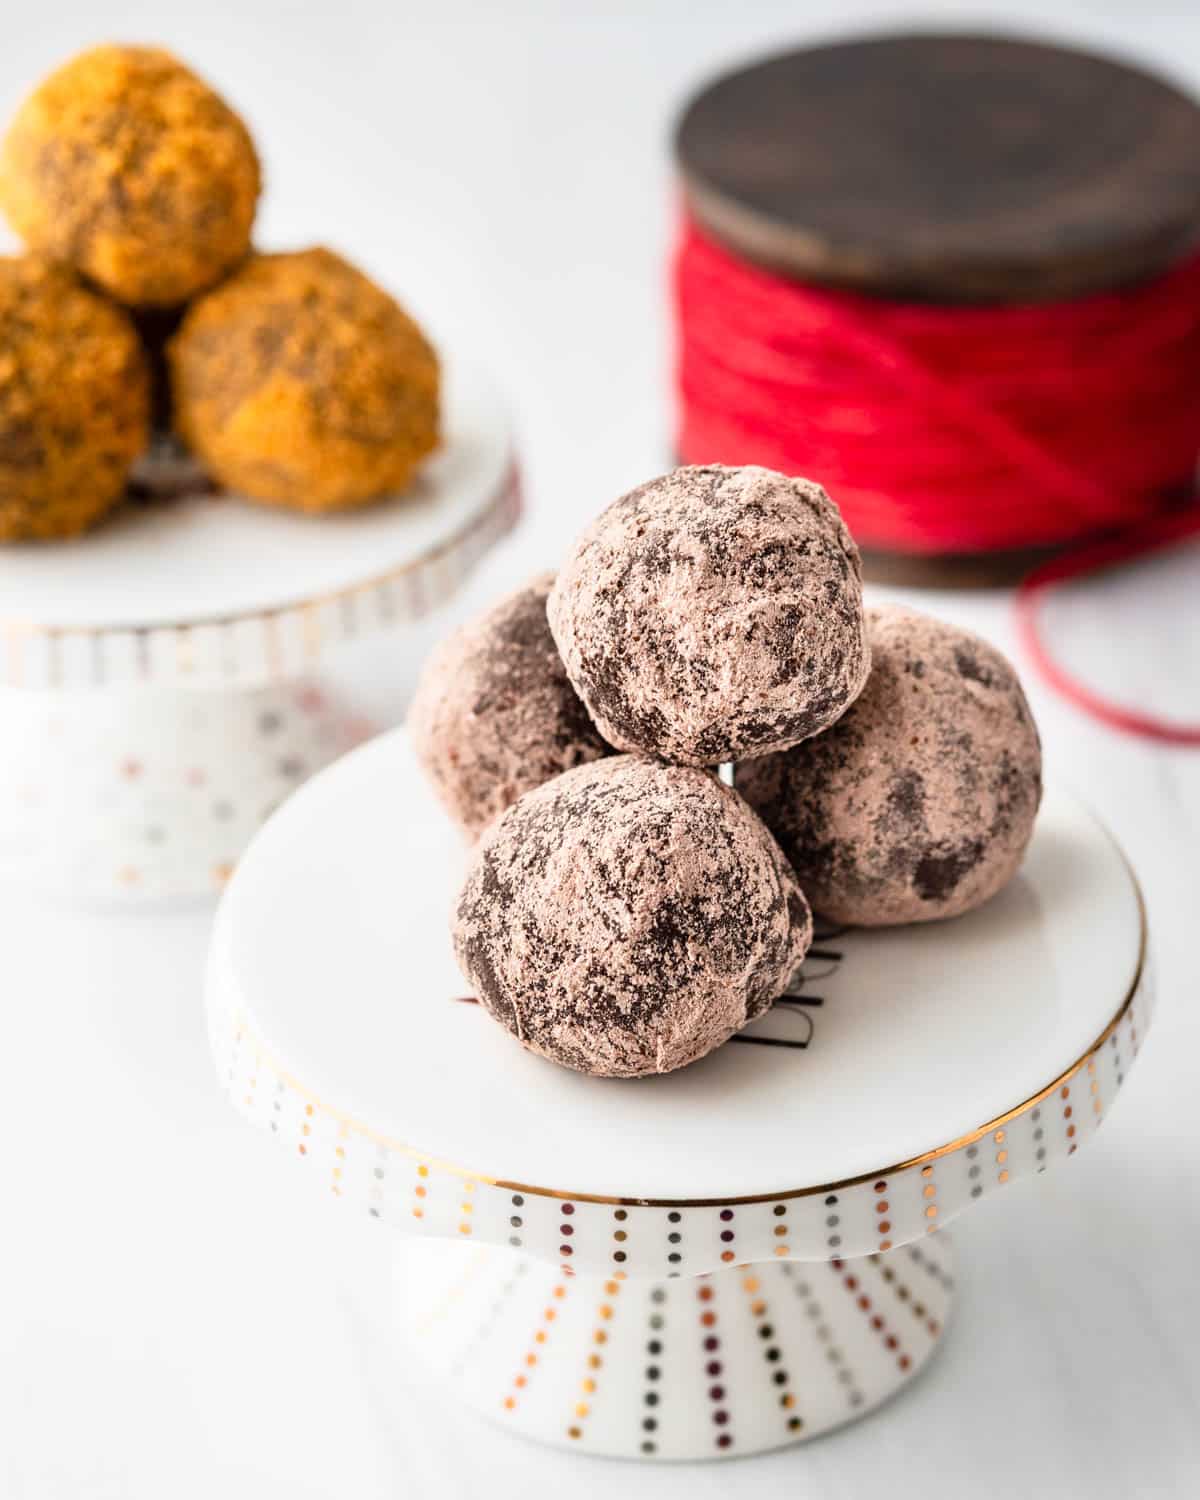 chocolate gingerbread truffles coated in chocolate or in gingerbread.